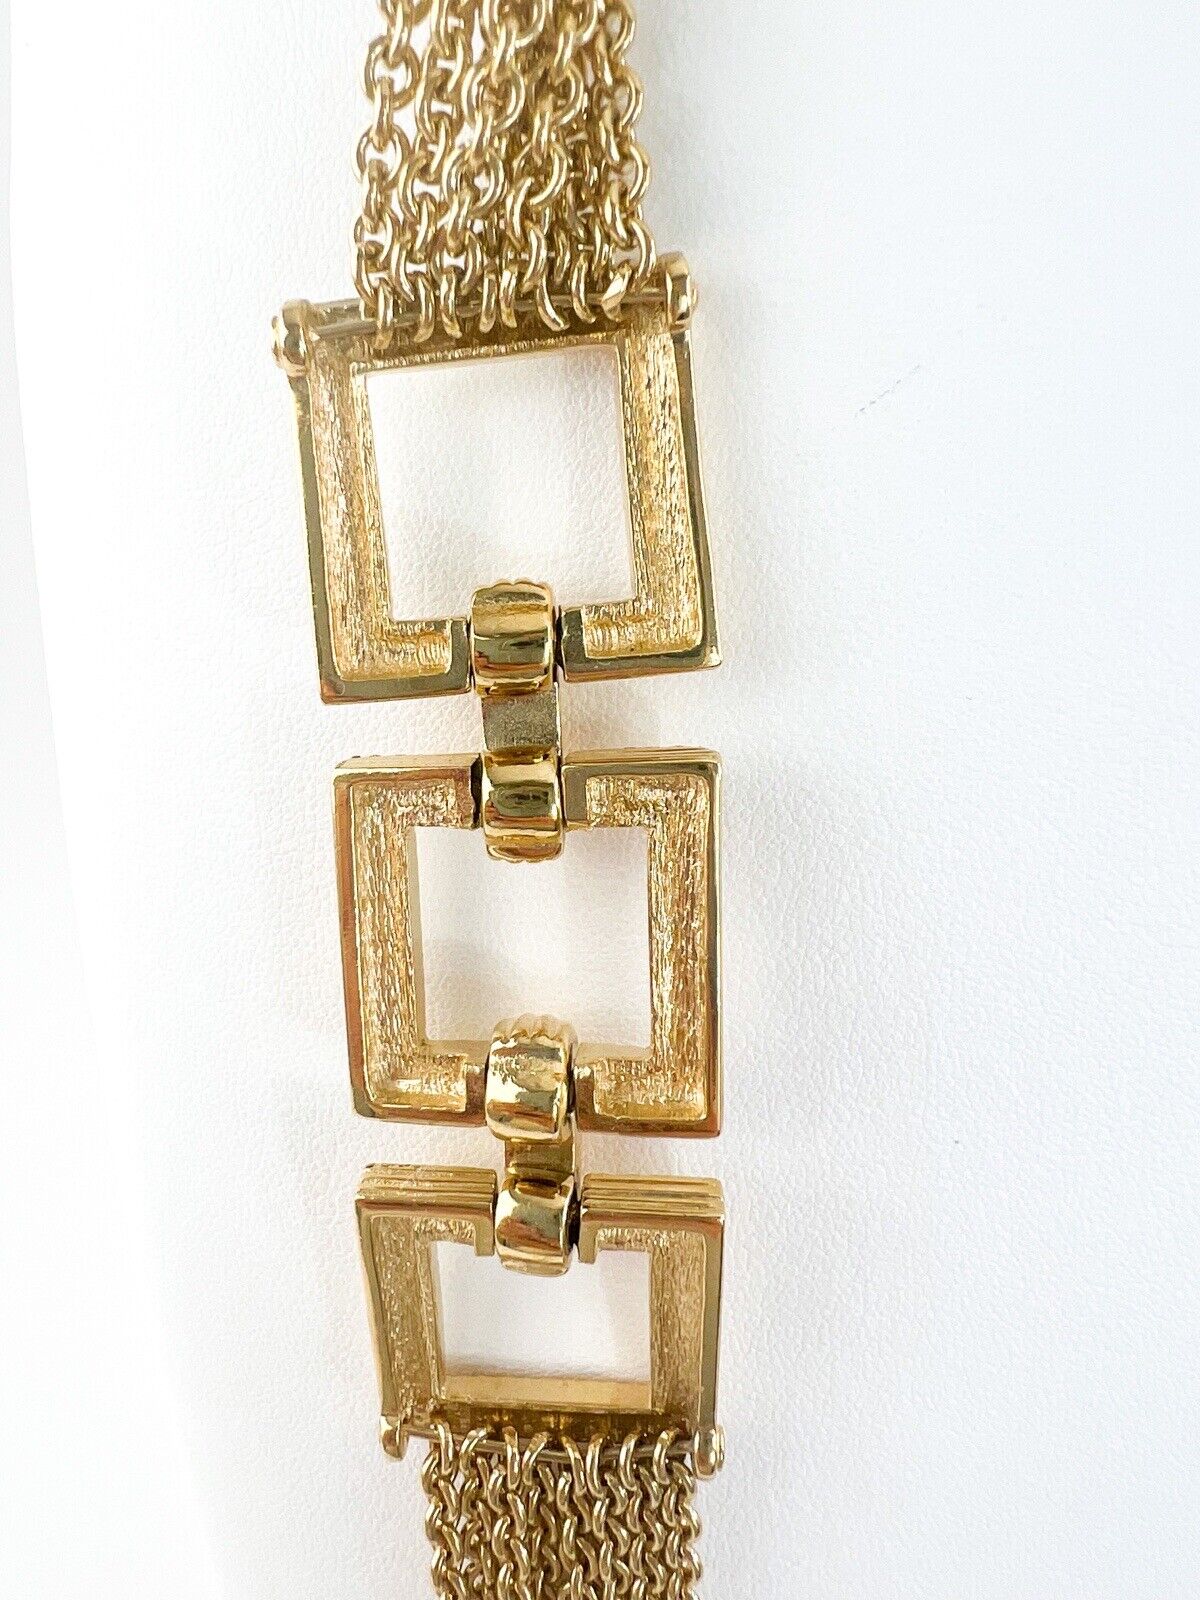 【SOLD OUT】Christian Dior Vintage Gold Tone Multi-strand Necklace Diorama